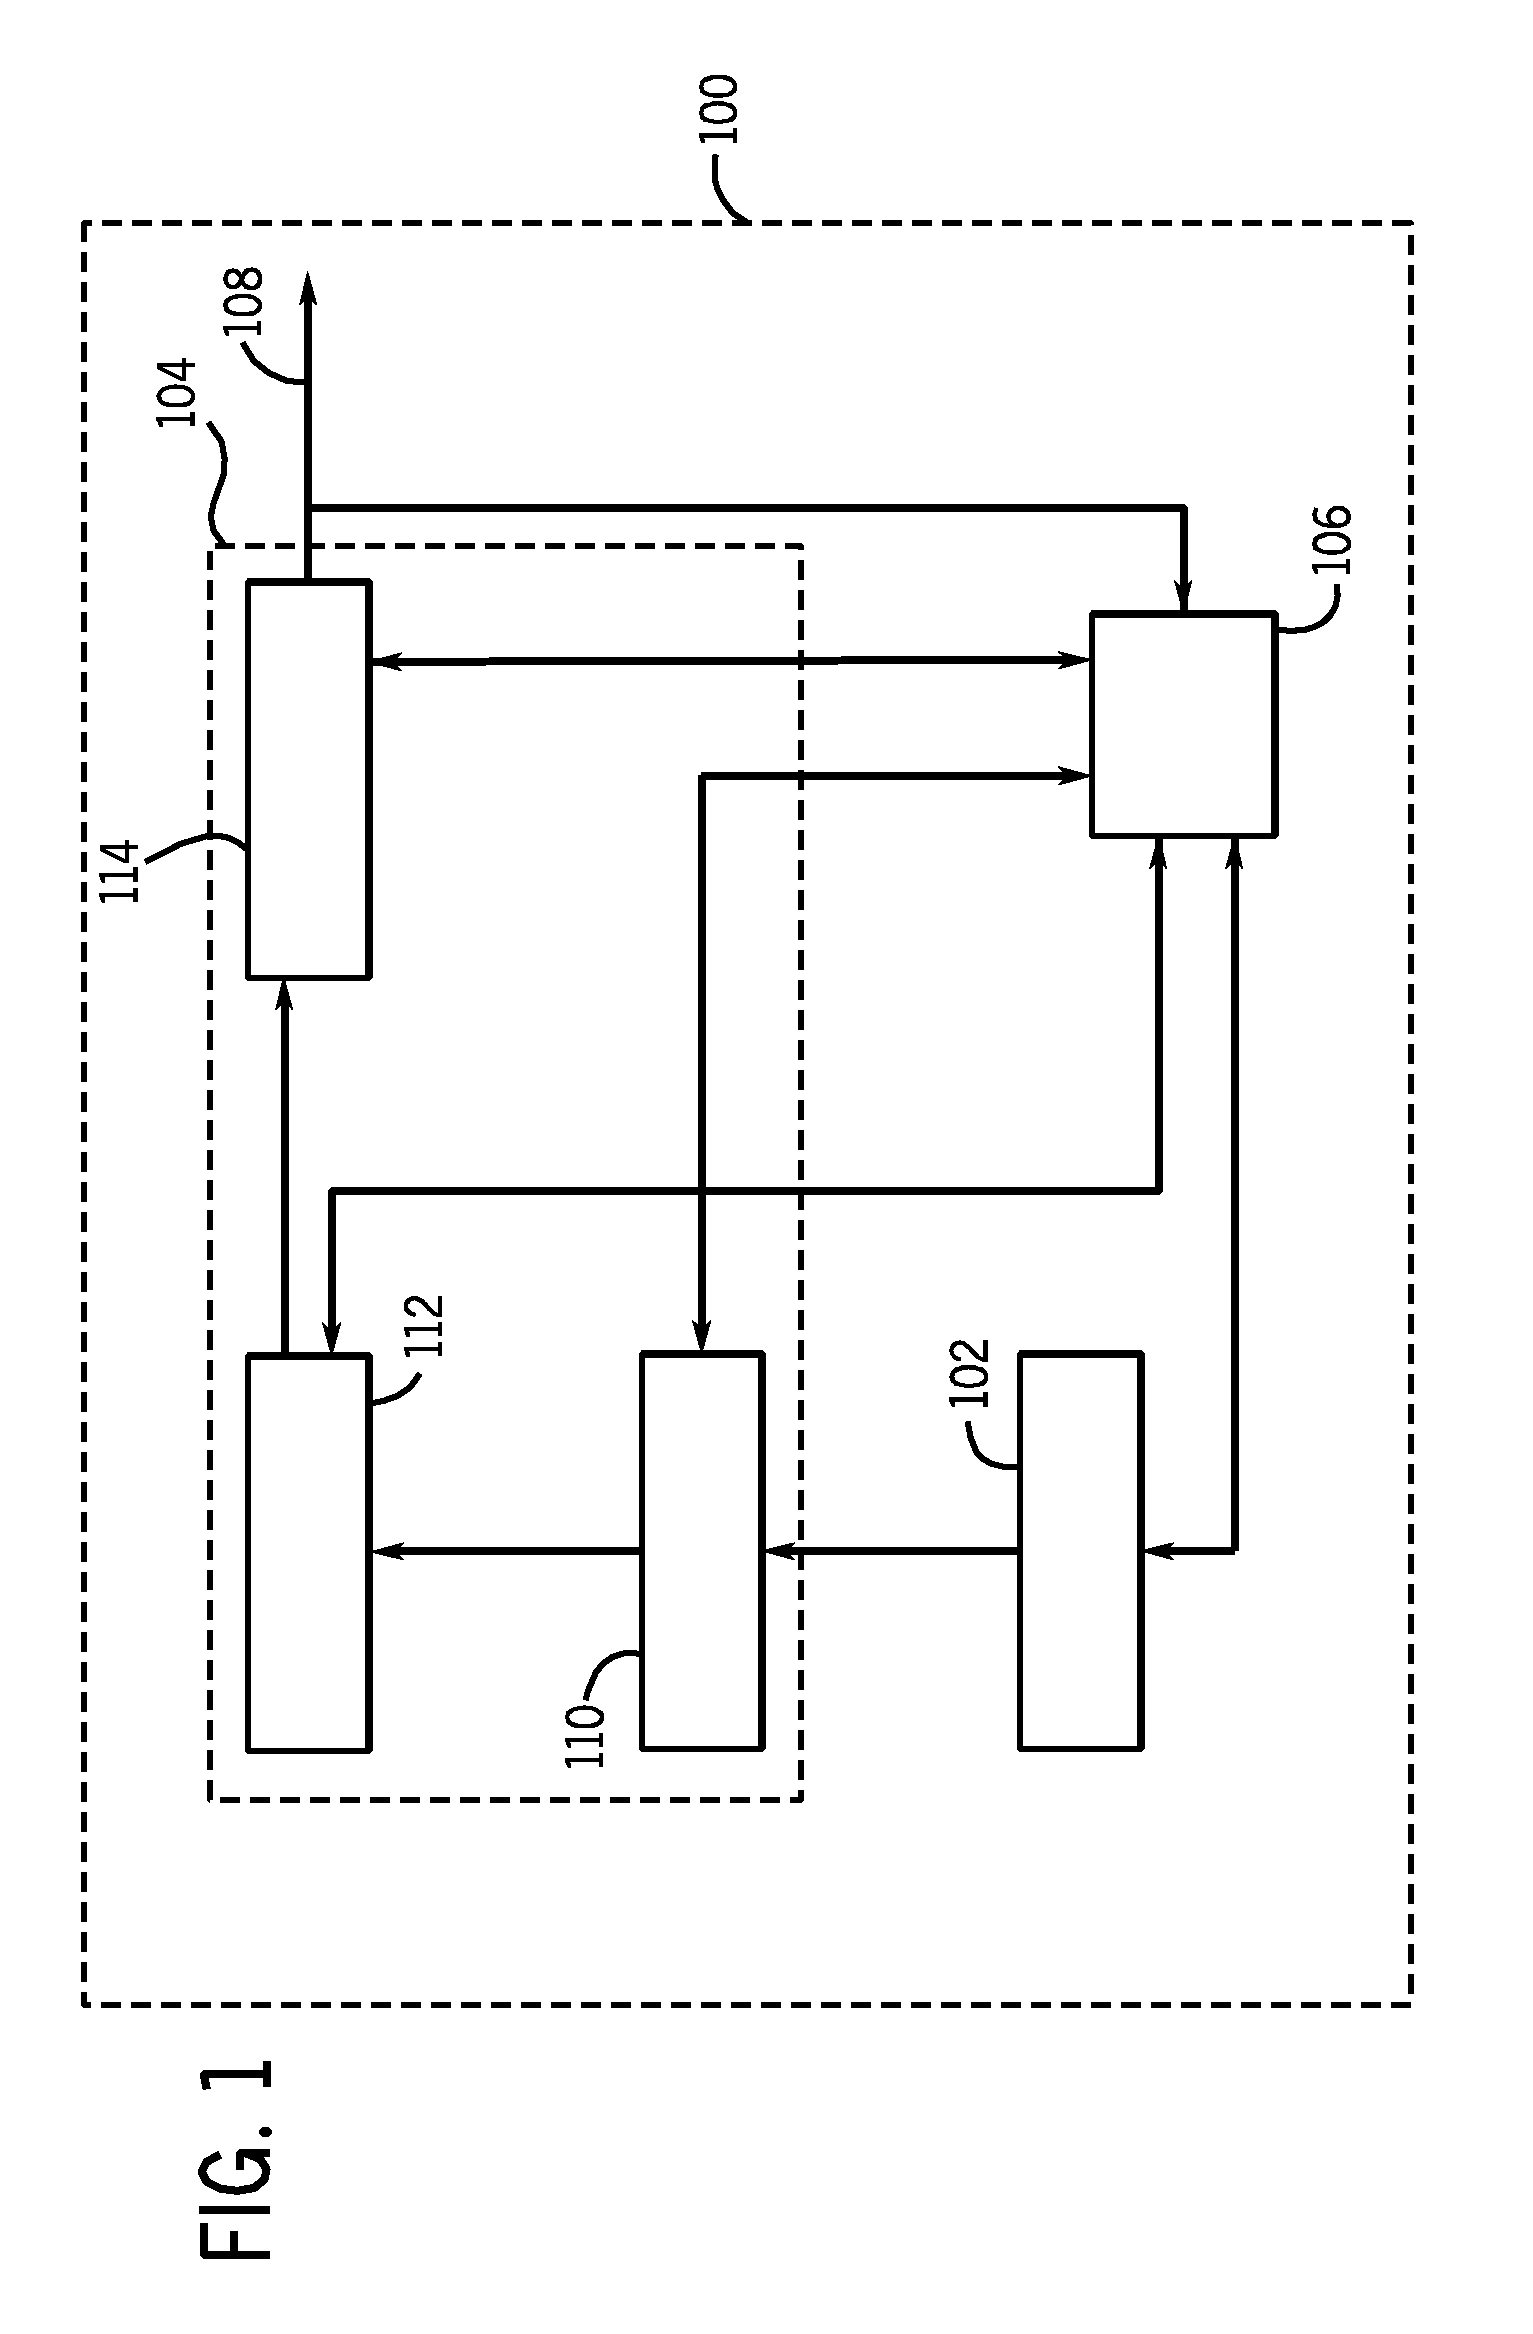 Method and apparatus for welding with battery power